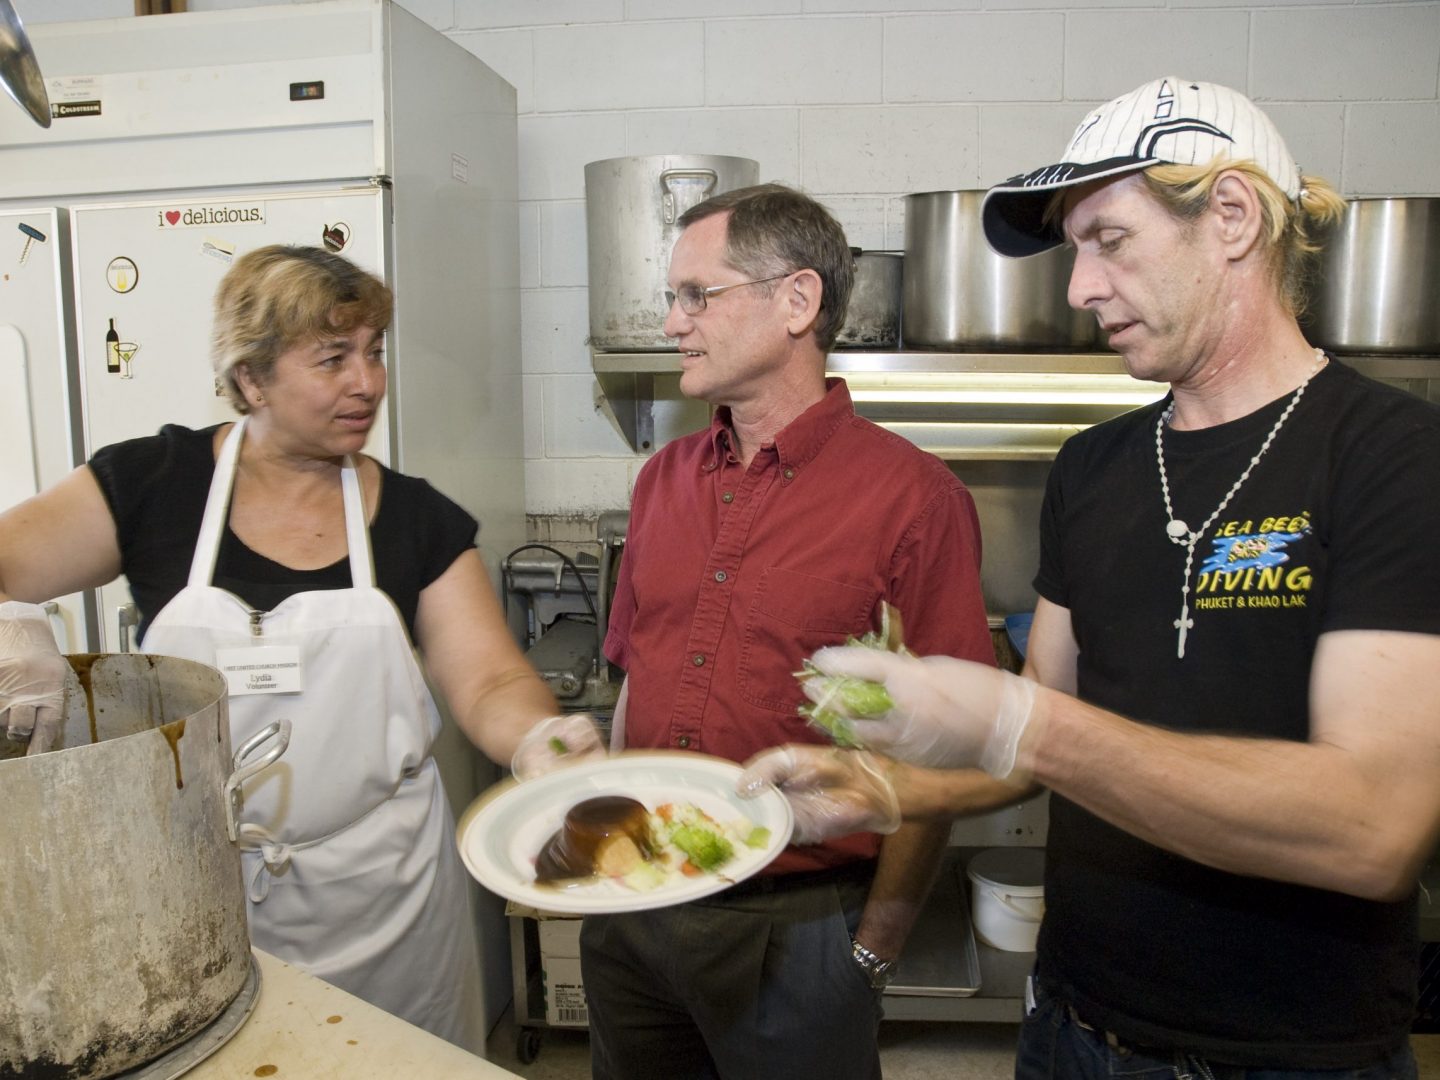 two white men and white woman in kitchen